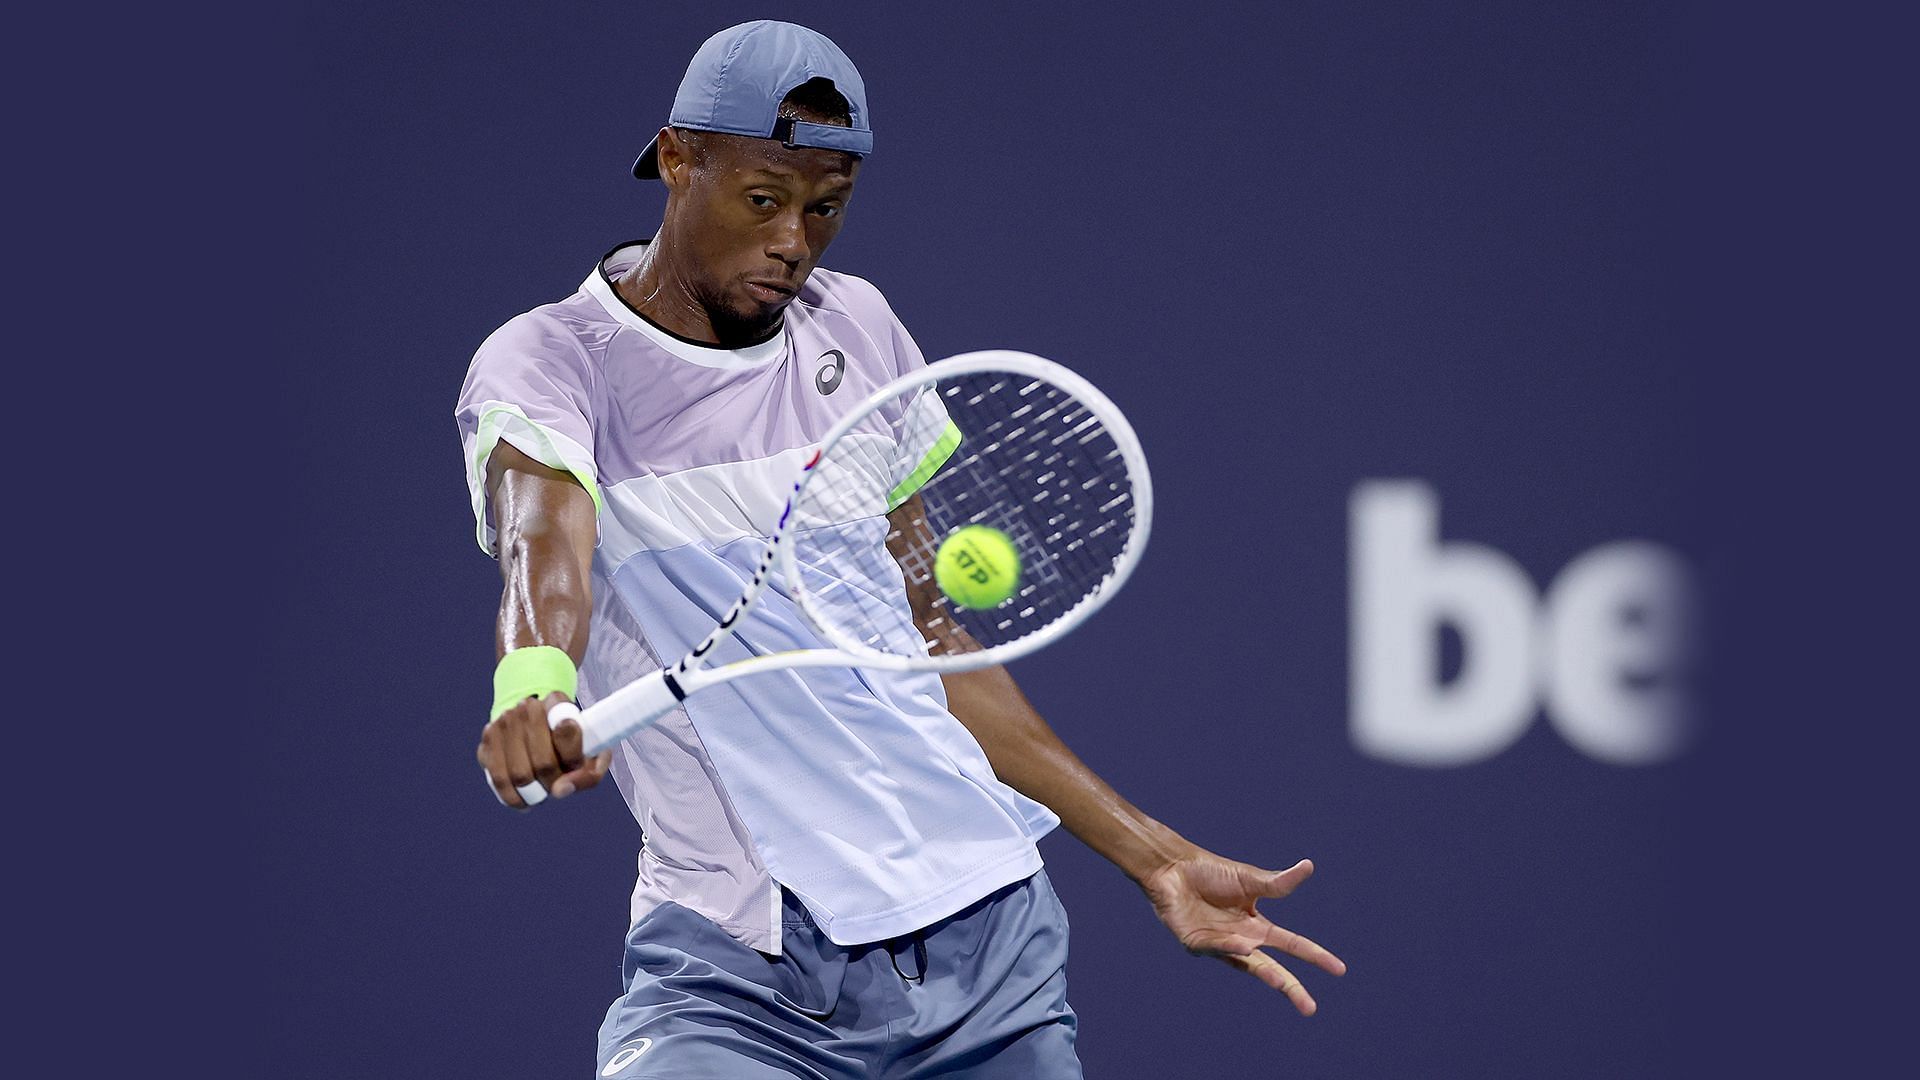 Christopher Eubanks reaches the quarterfinals in Miami for the first time in his career